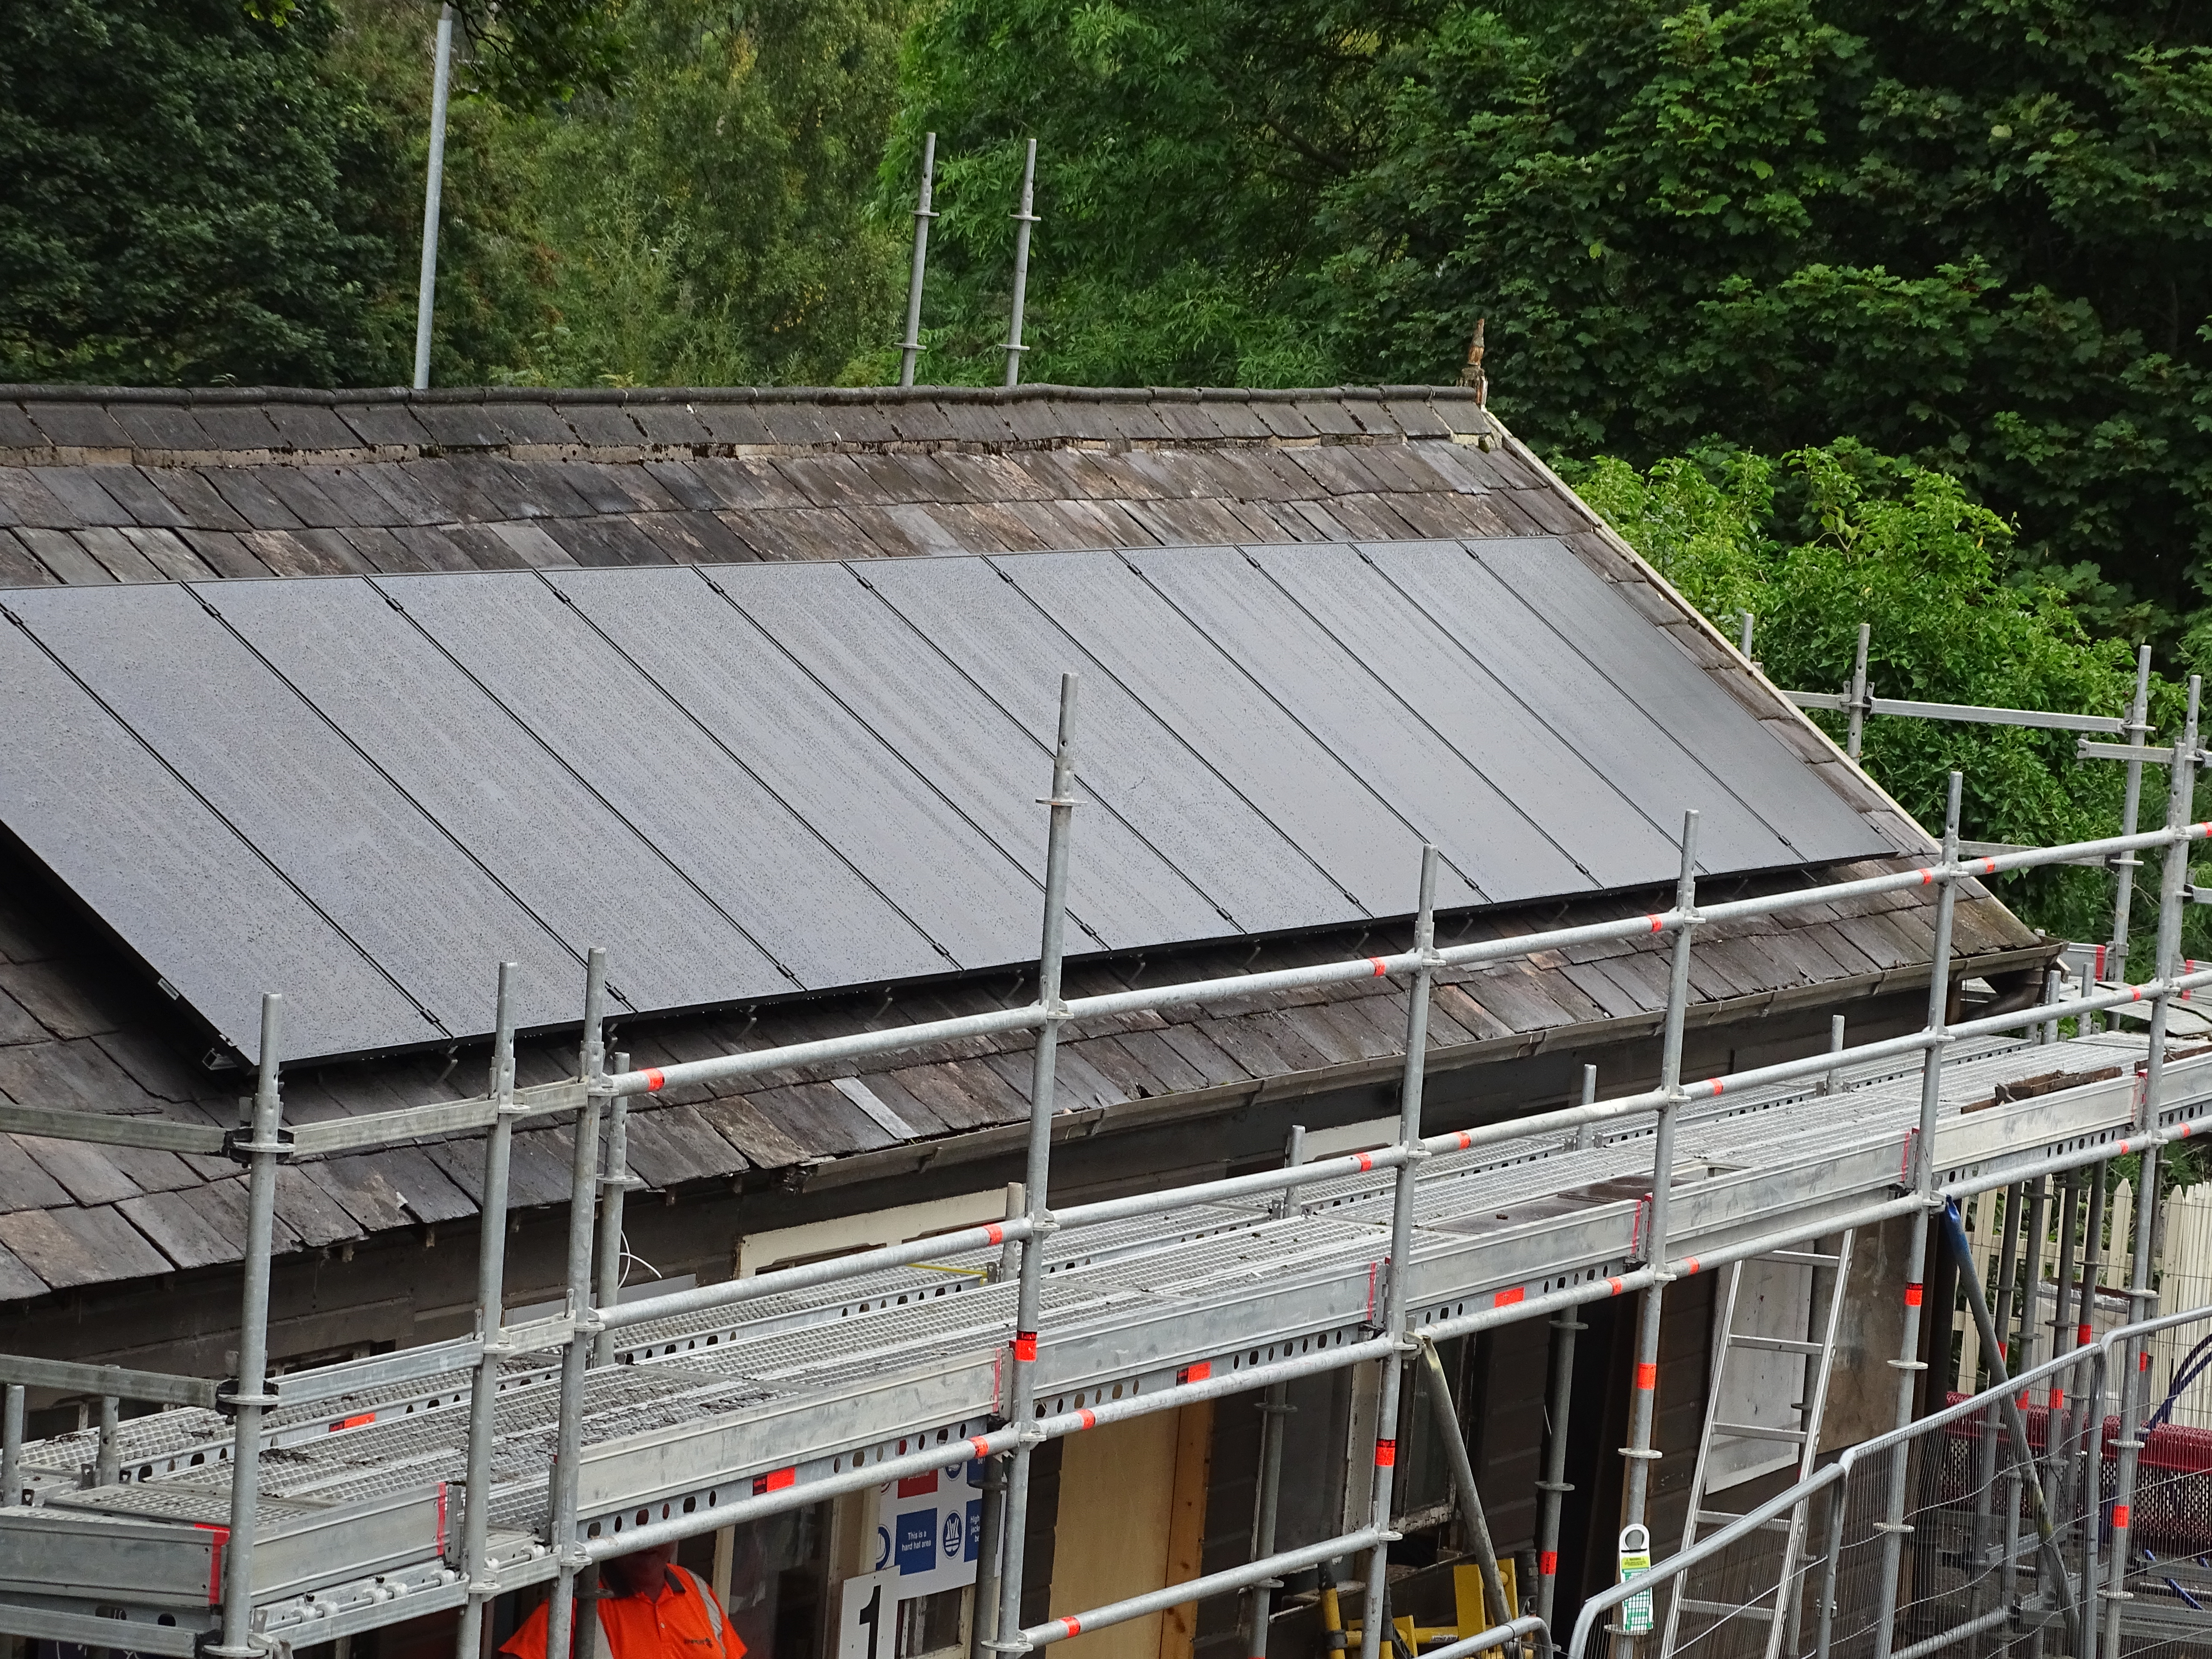 PV Panels on the Roof